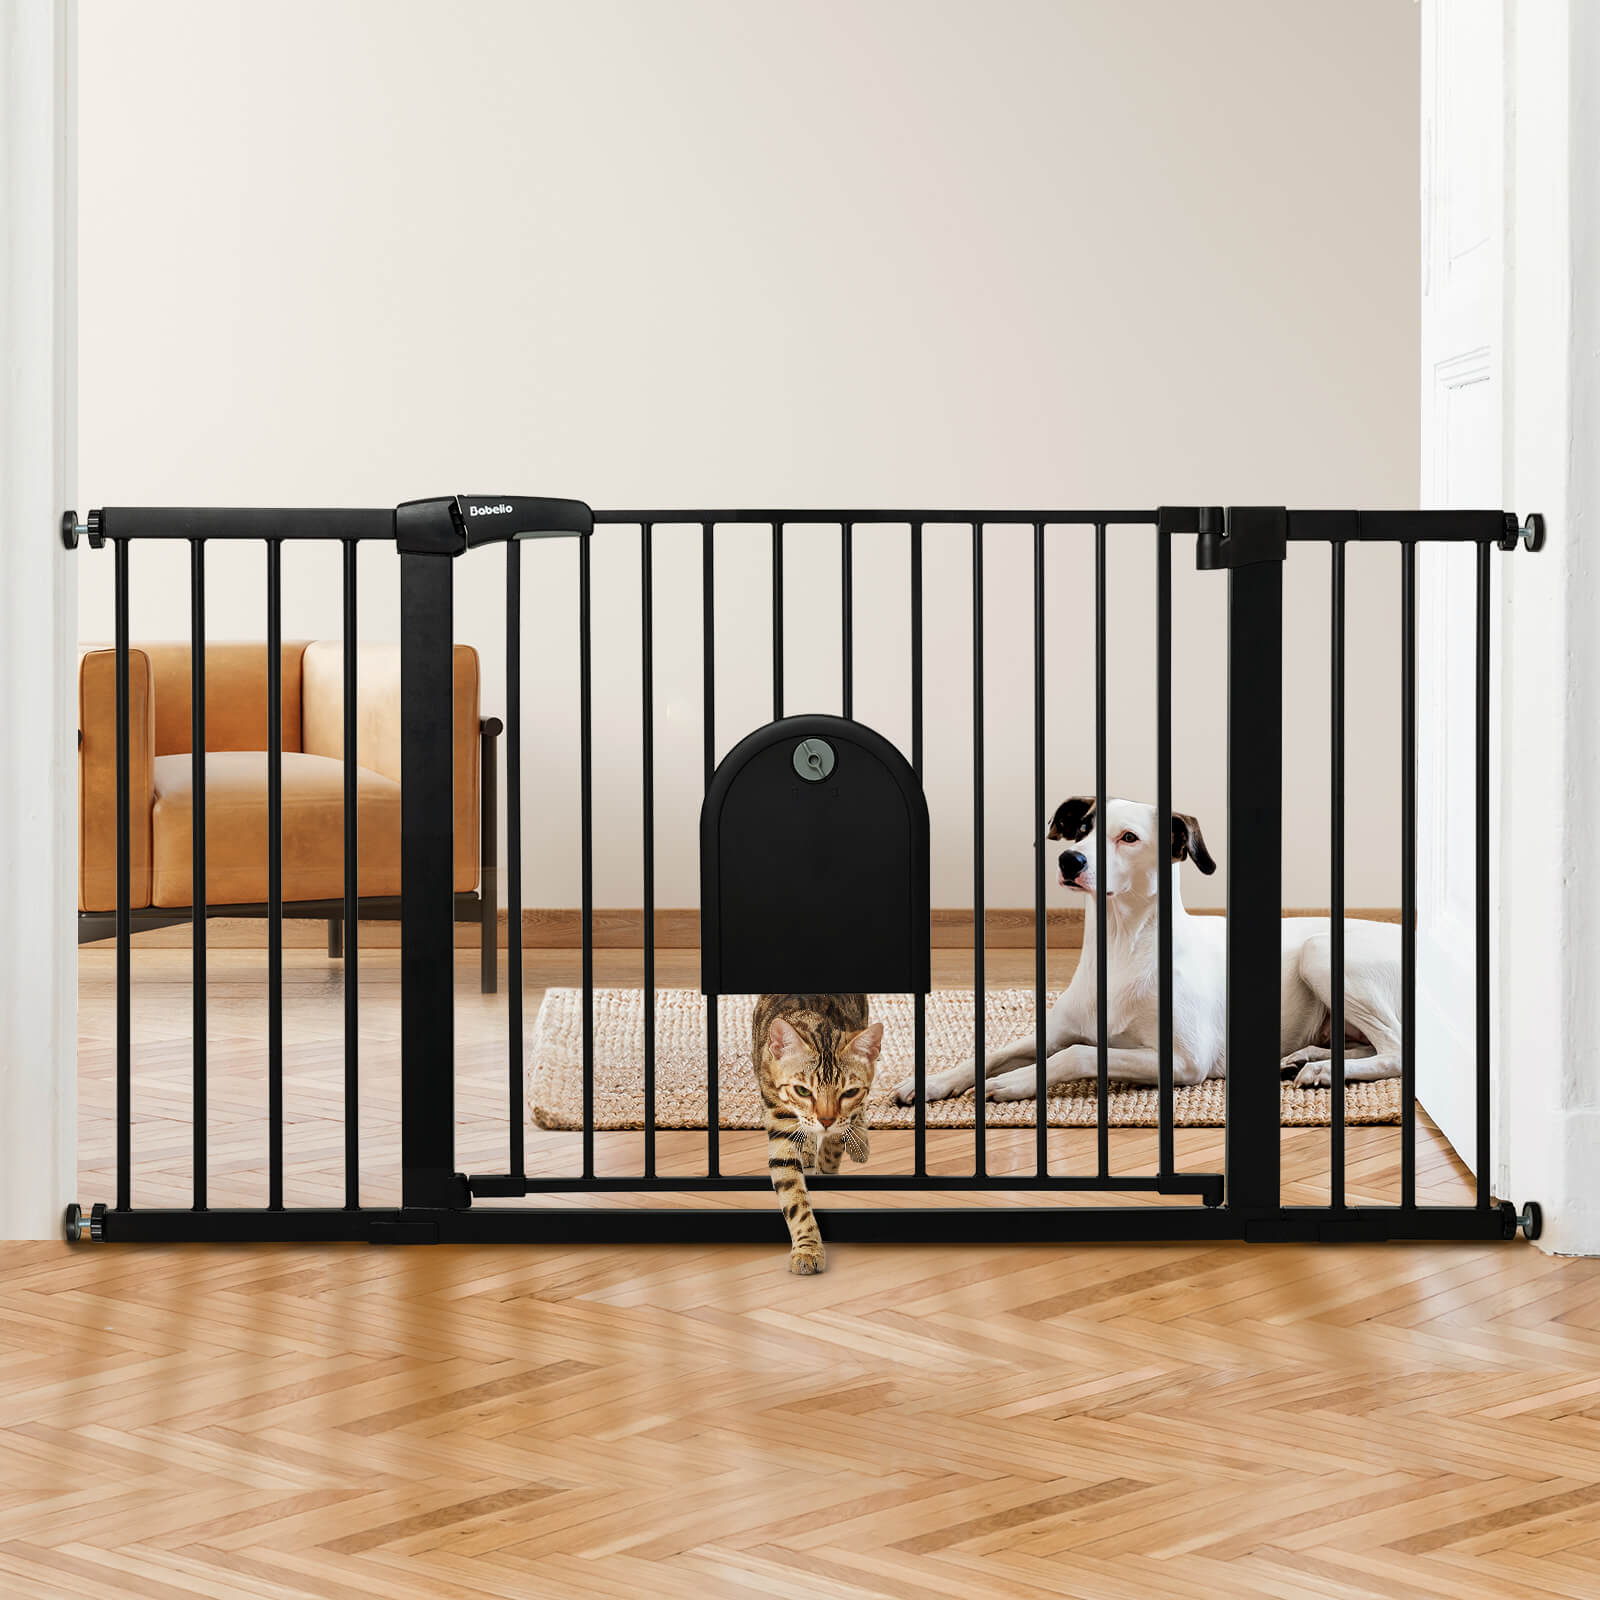 Babelio Extra Wide 37-57" Auto-Close Baby and Pet Gate with Cat Door & Extensions